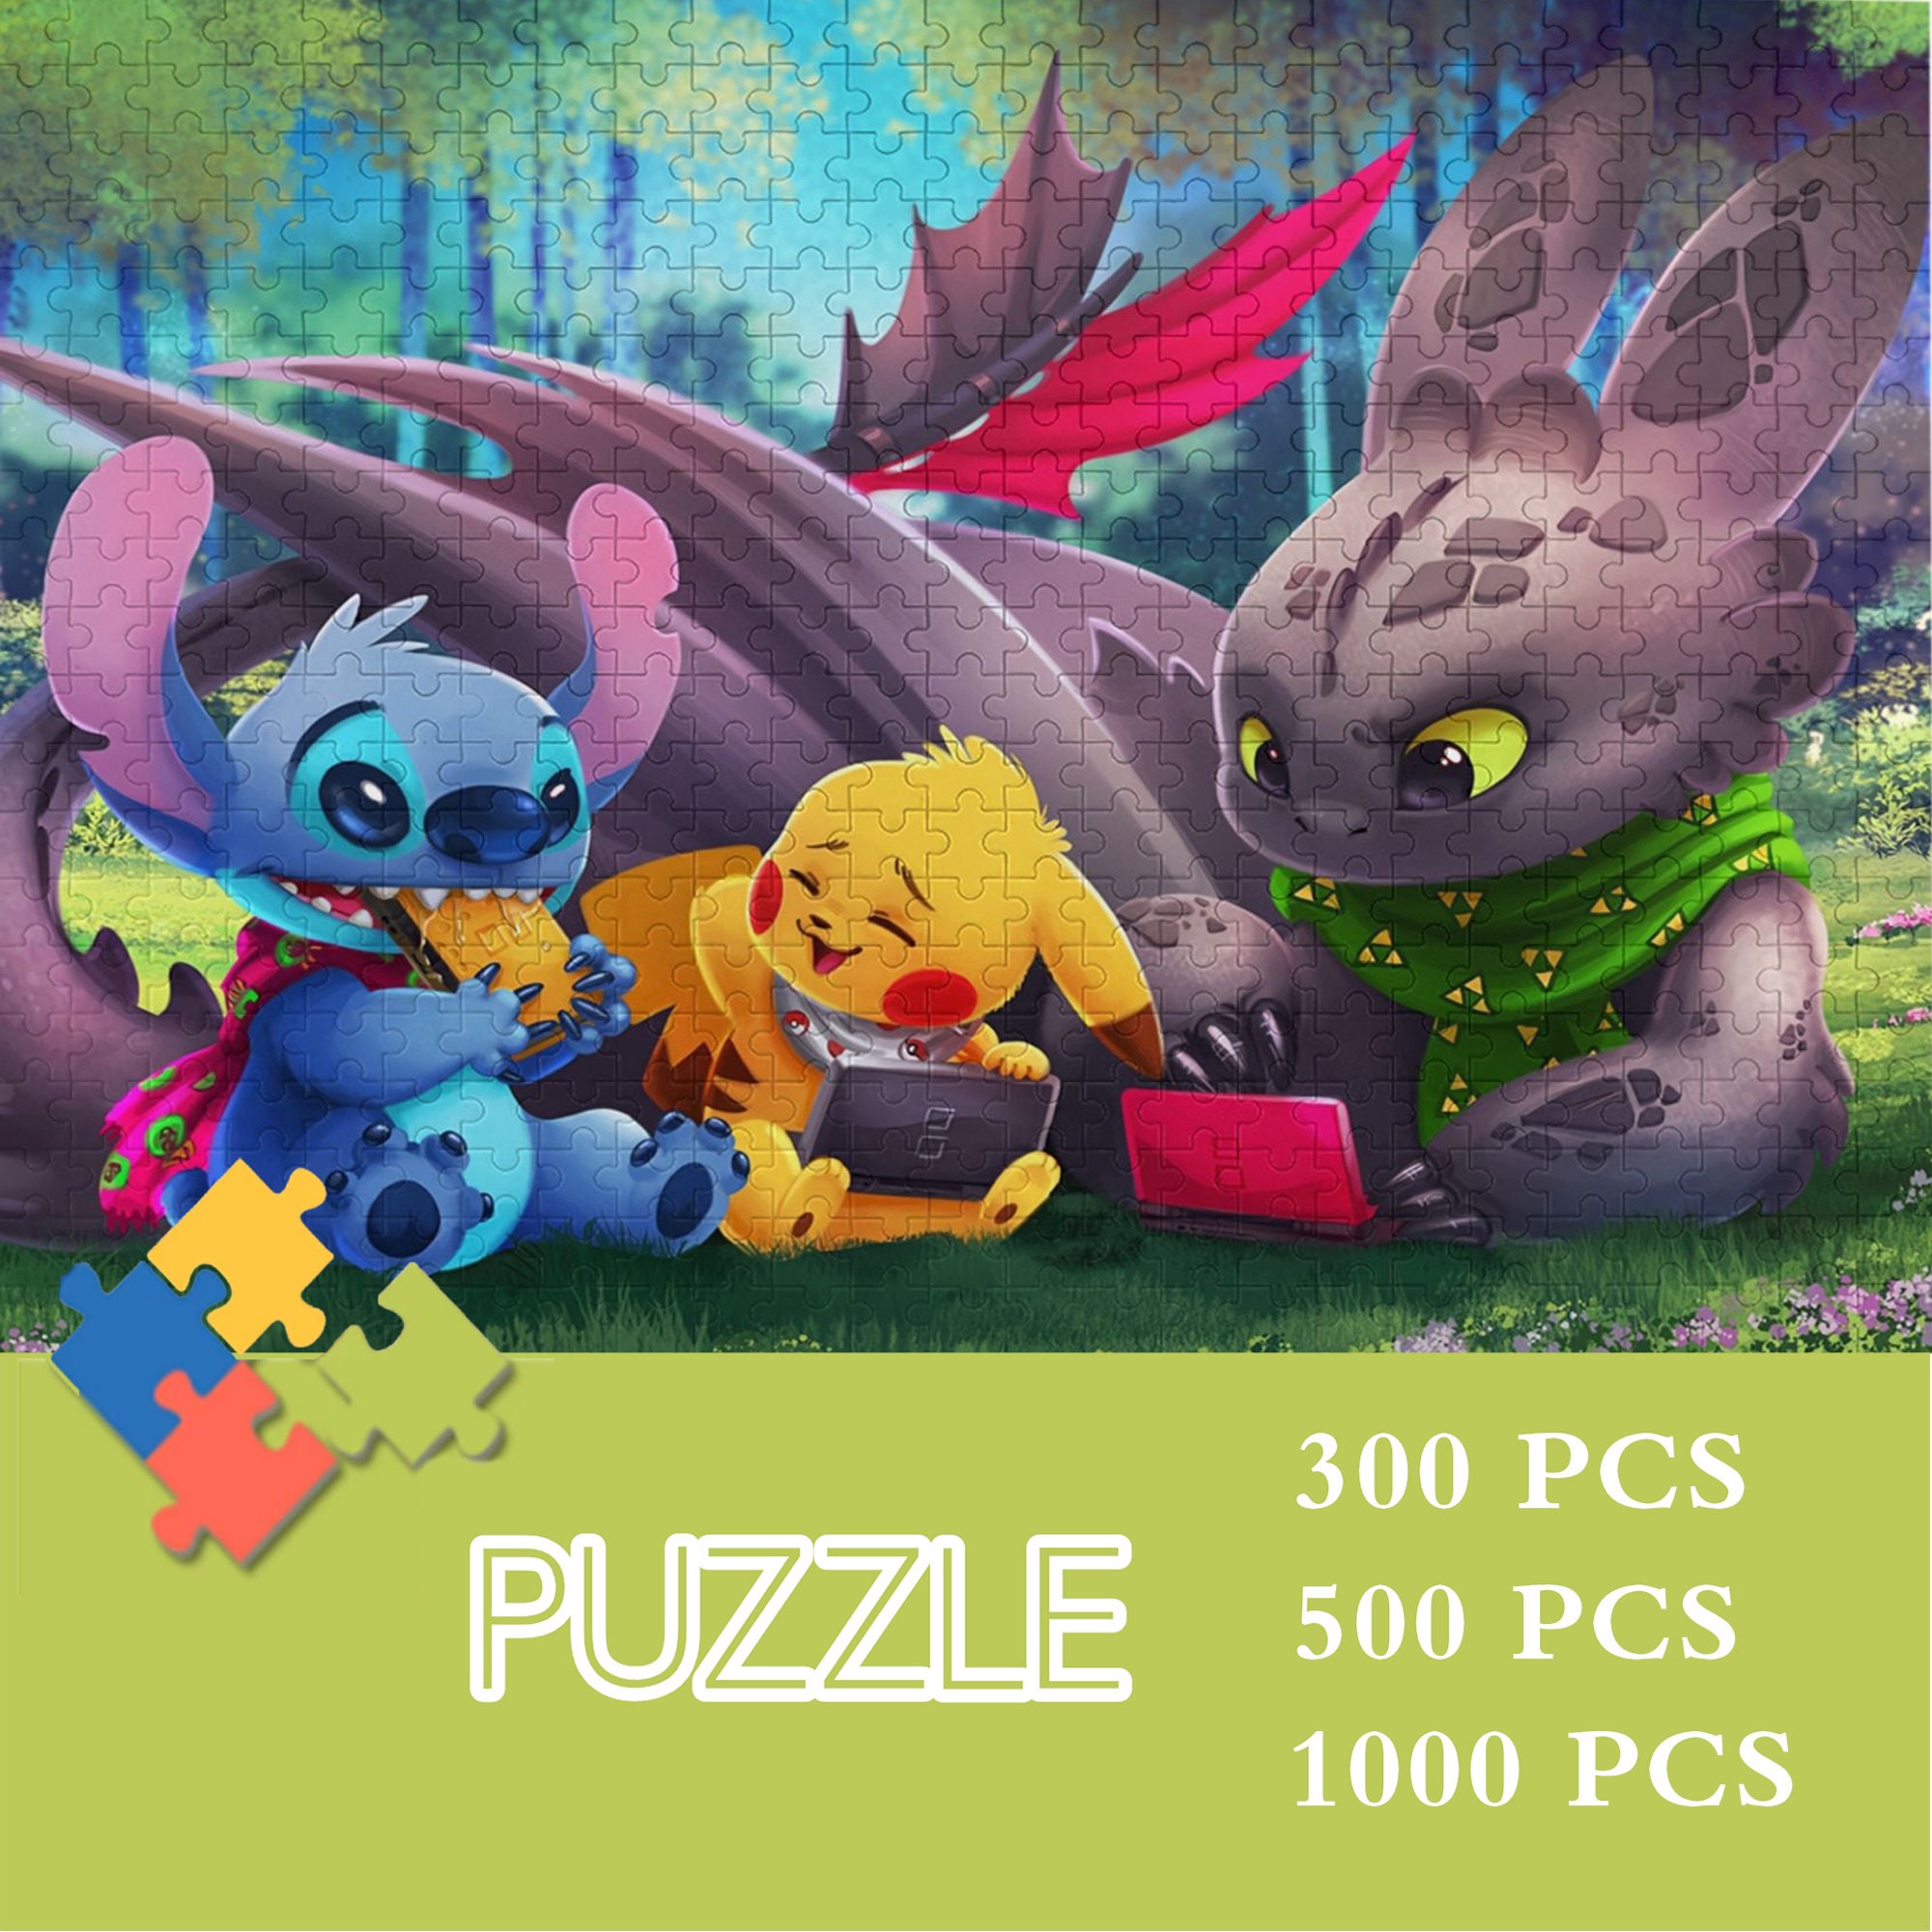 stitch dreamland Jigsaw Puzzle for Sale by cloud lee